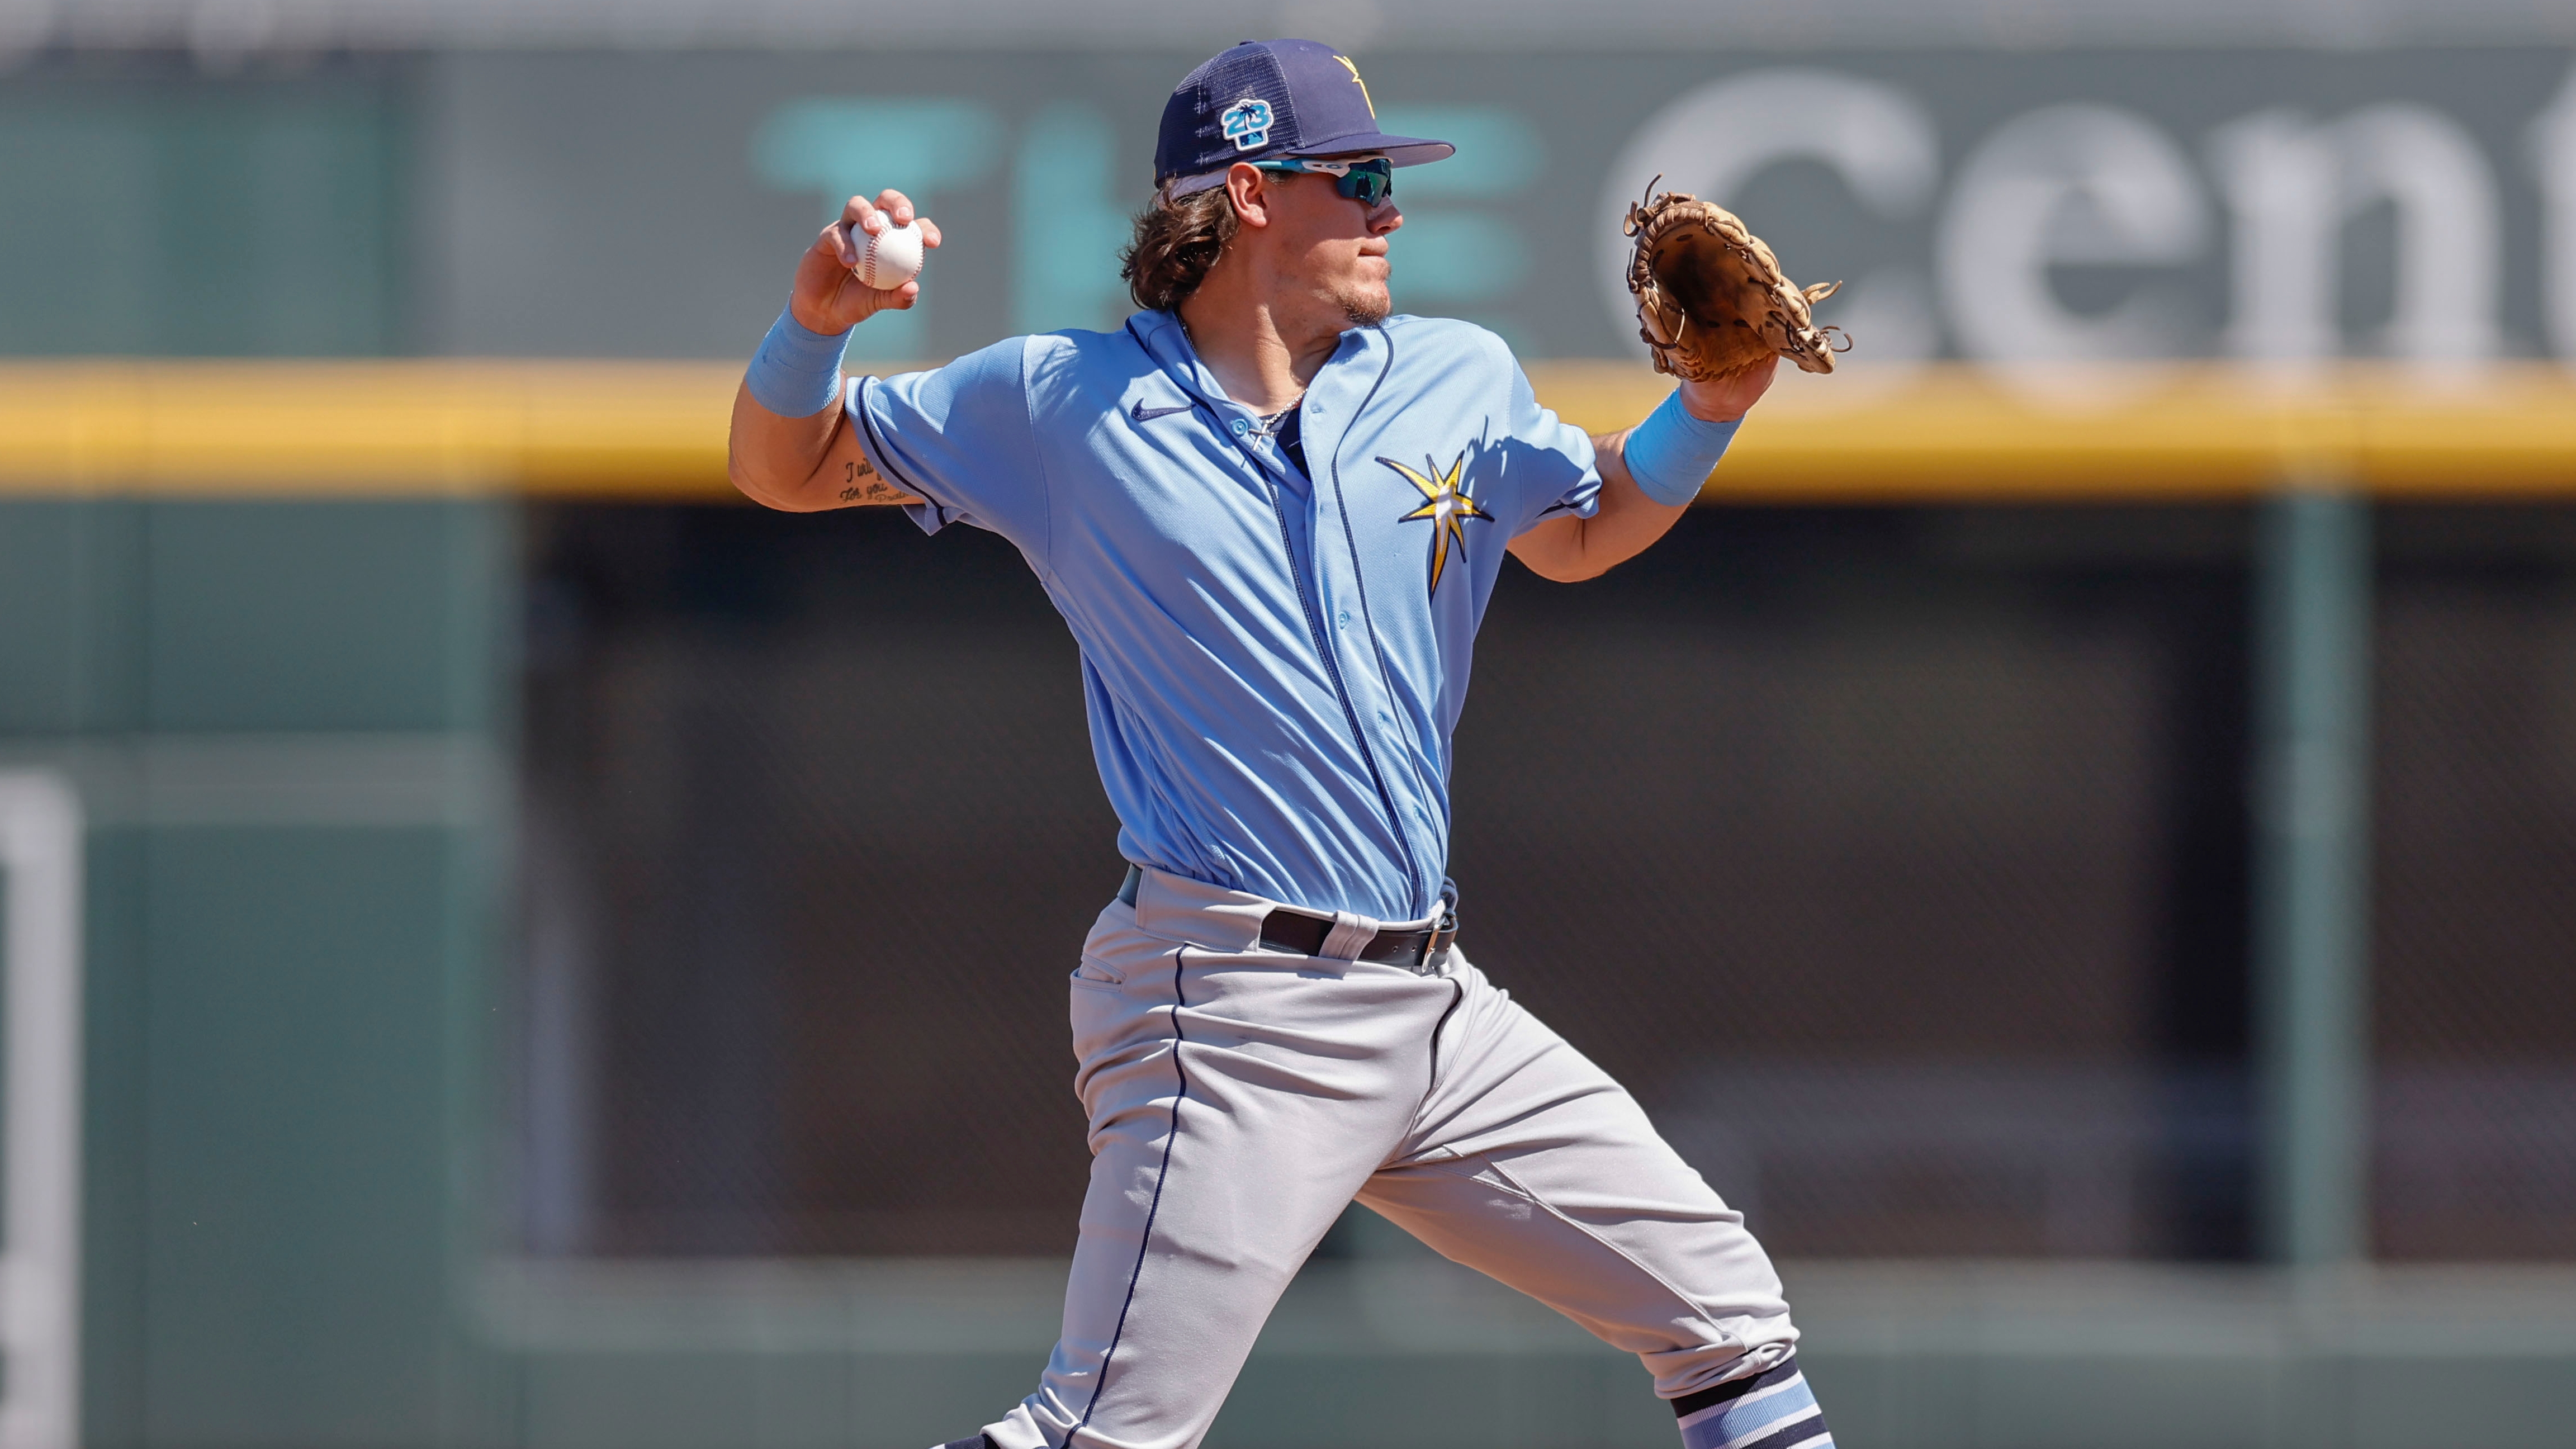 He's got all the right numbers, but this Rays prospect still needs to